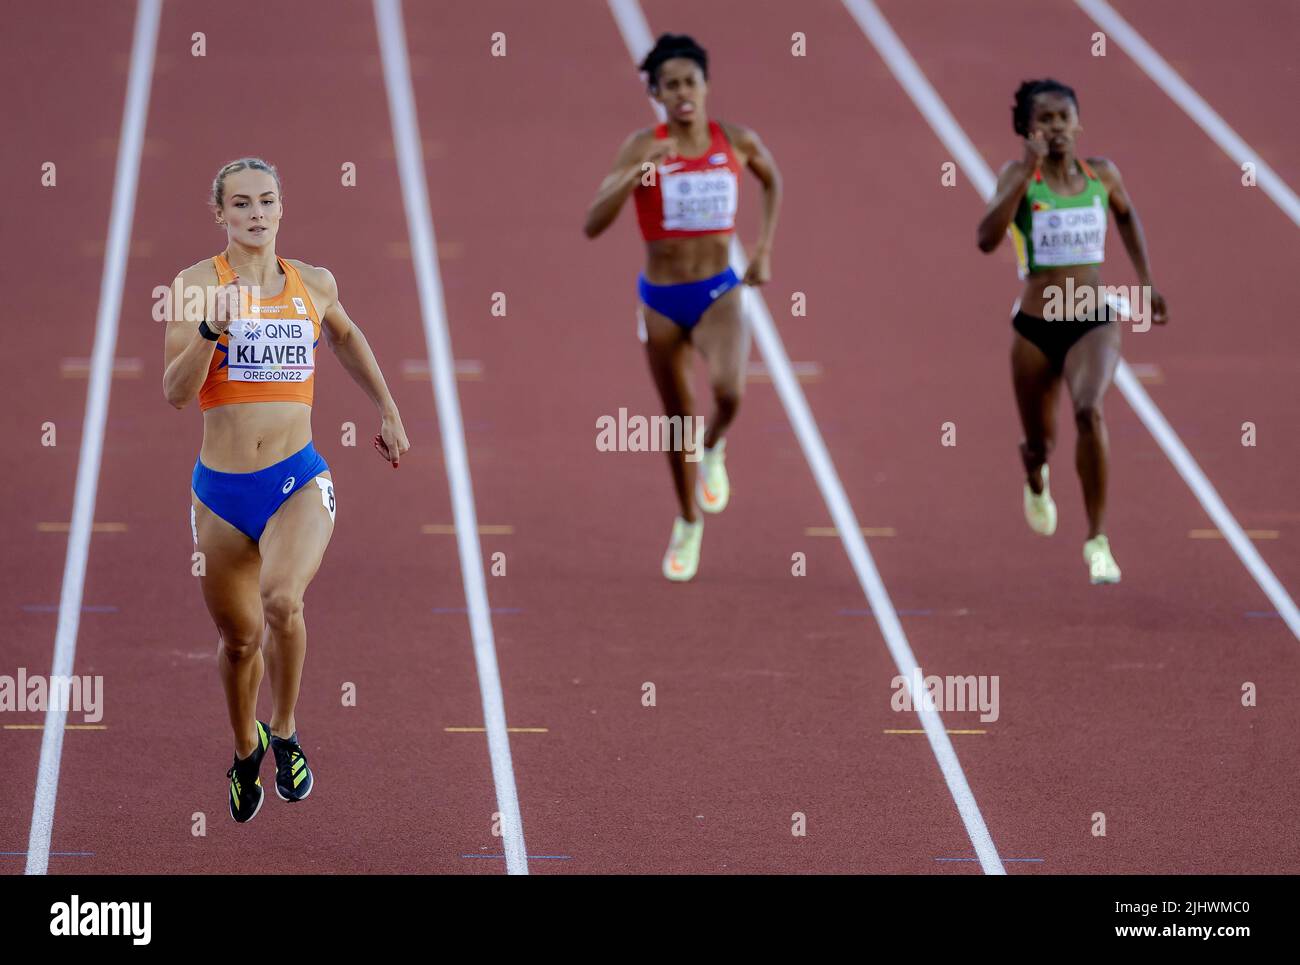 2022-07-21 03:54:15 EUGENE - Lieke Klaver in action during the semifinal of the 400 meters on the sixth day of the World Athletics Championships at the Hayward Field stadium. ANP ROBIN VAN LONKHUIJSEN netherlands out - belgium out Stock Photo